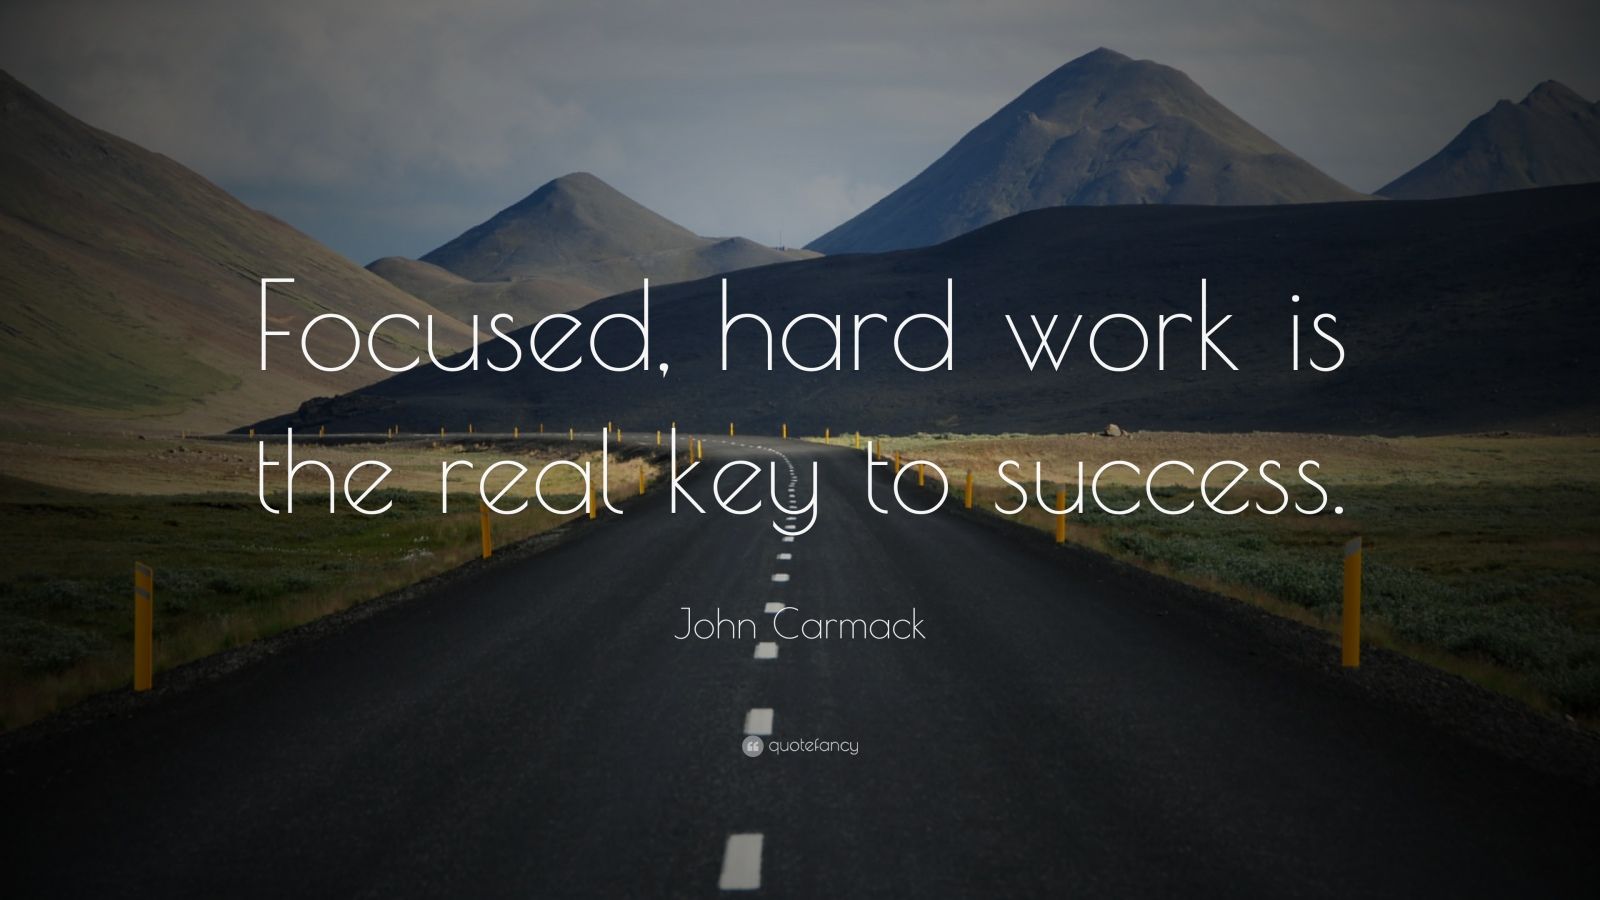 John Carmack Quote “Focused, hard work is the real key to success